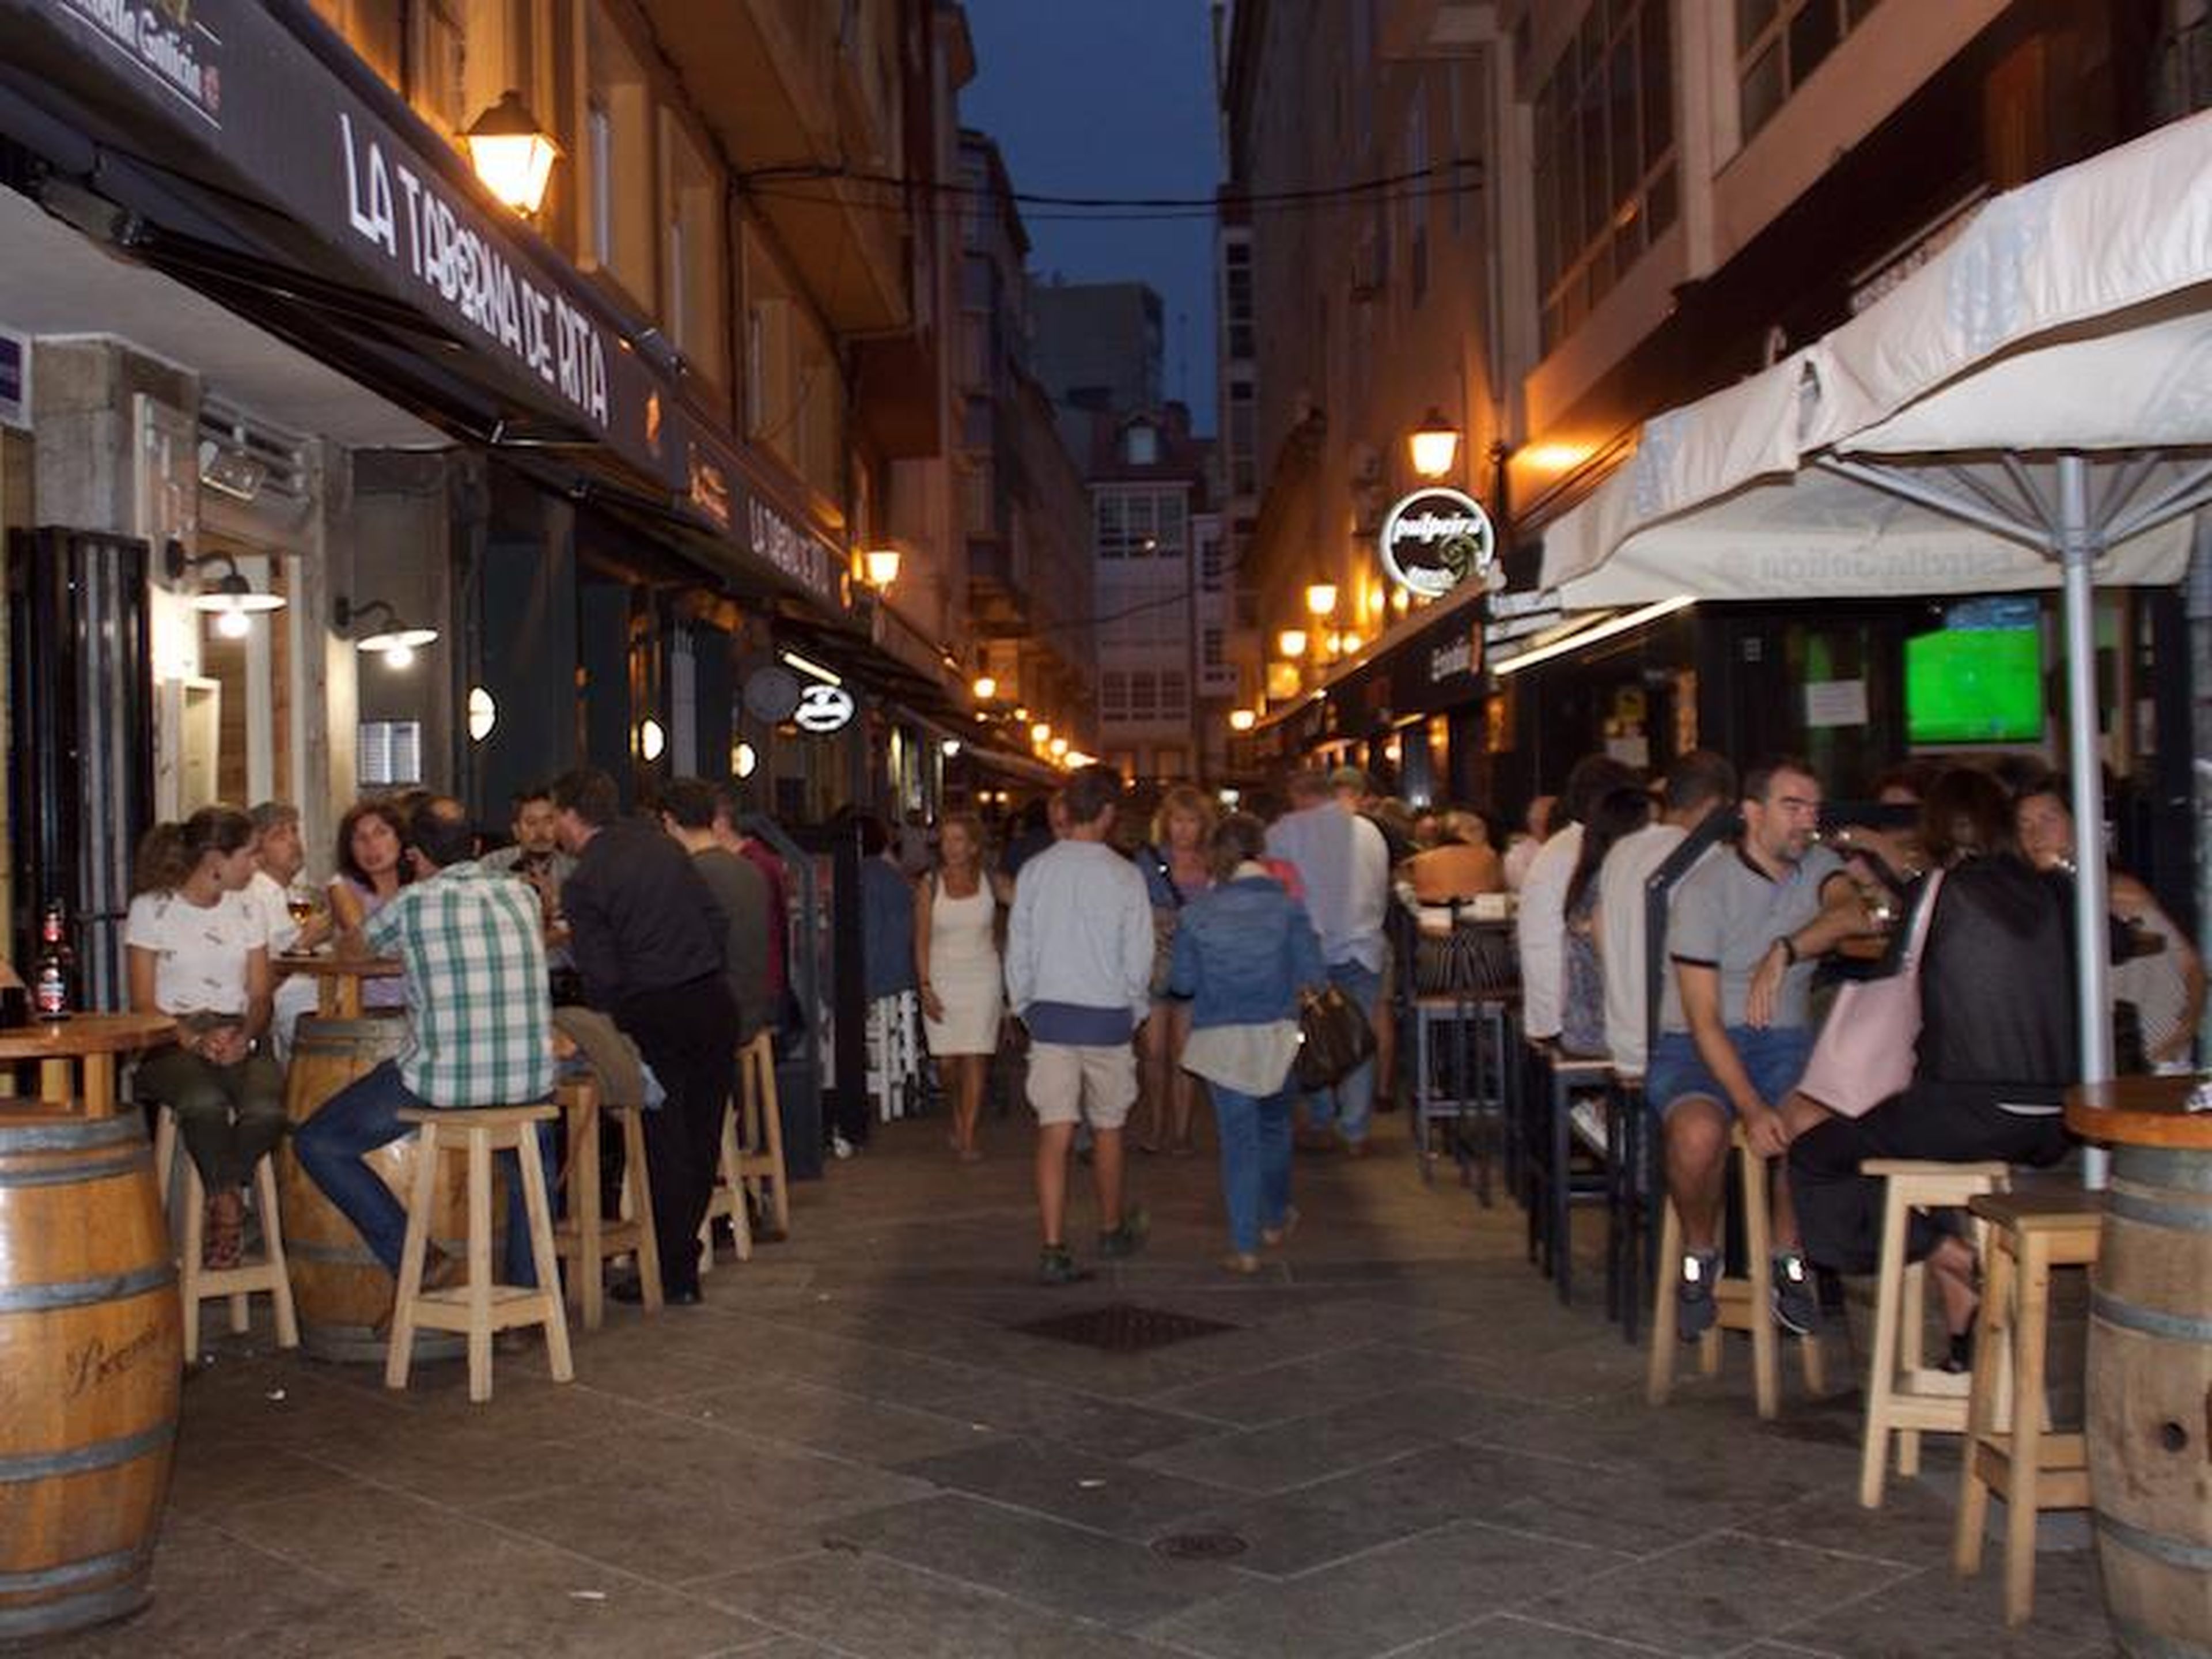 When we explored Calle de Estrella on a Monday evening, the restaurants were brimming with people.